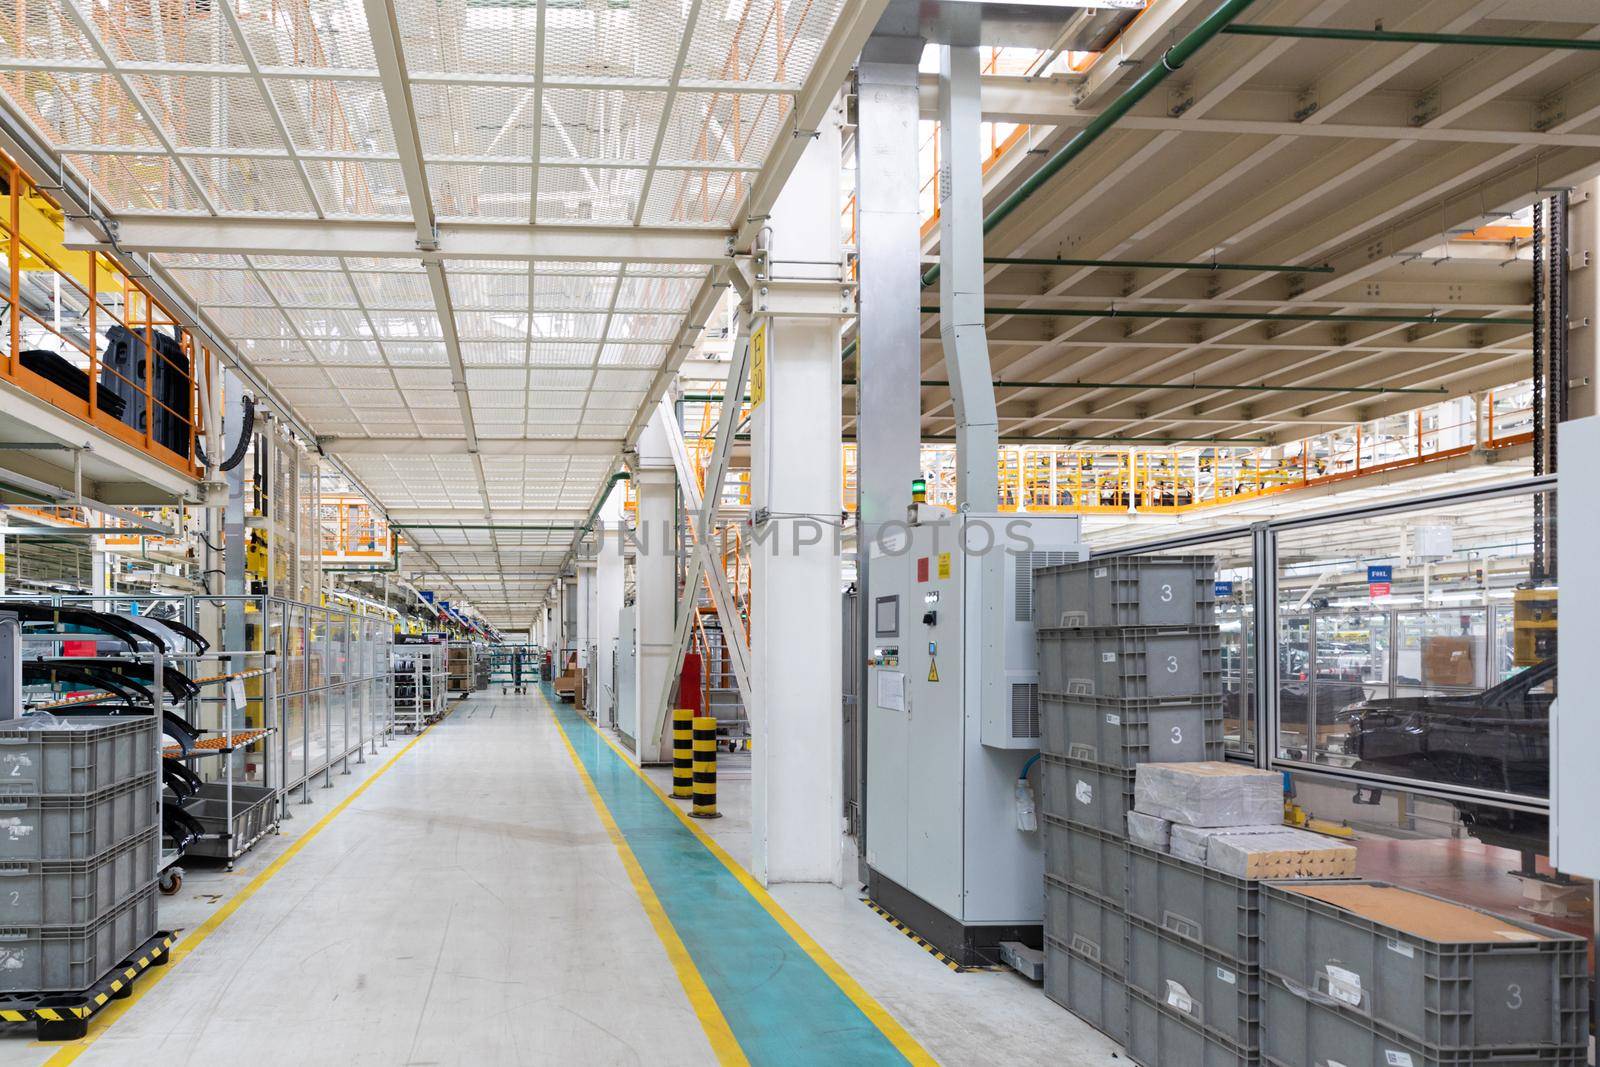 Factory for production of cars. Modern automotive industry. Interior of plant.